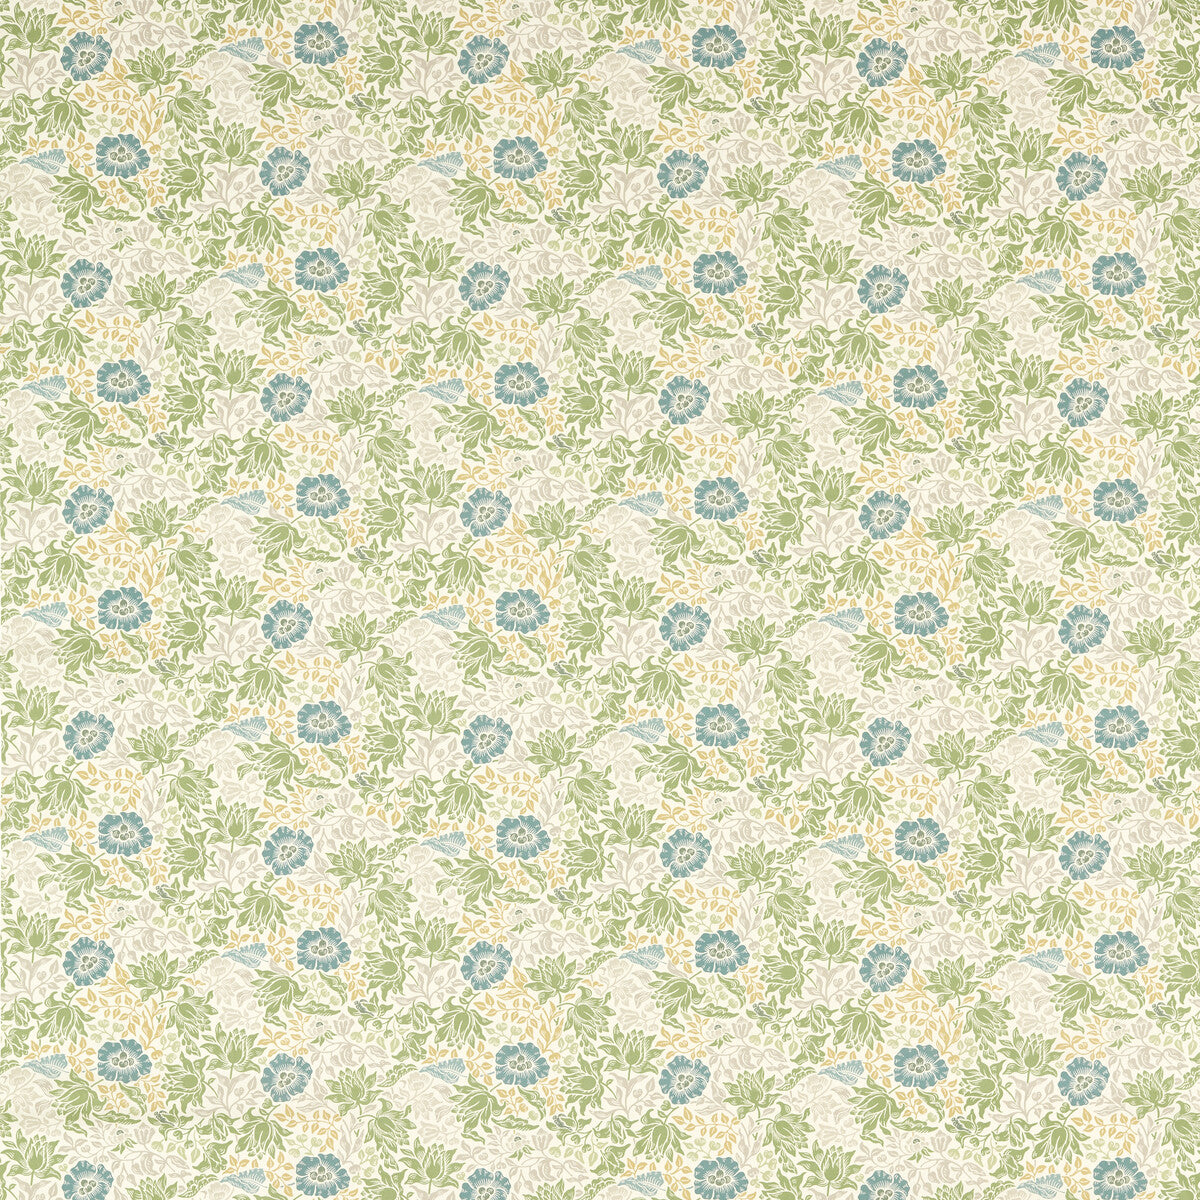 Mallow fabric in apple/linen color - pattern F1680/02.CAC.0 - by Clarke And Clarke in the Clarke &amp; Clarke William Morris Designs collection